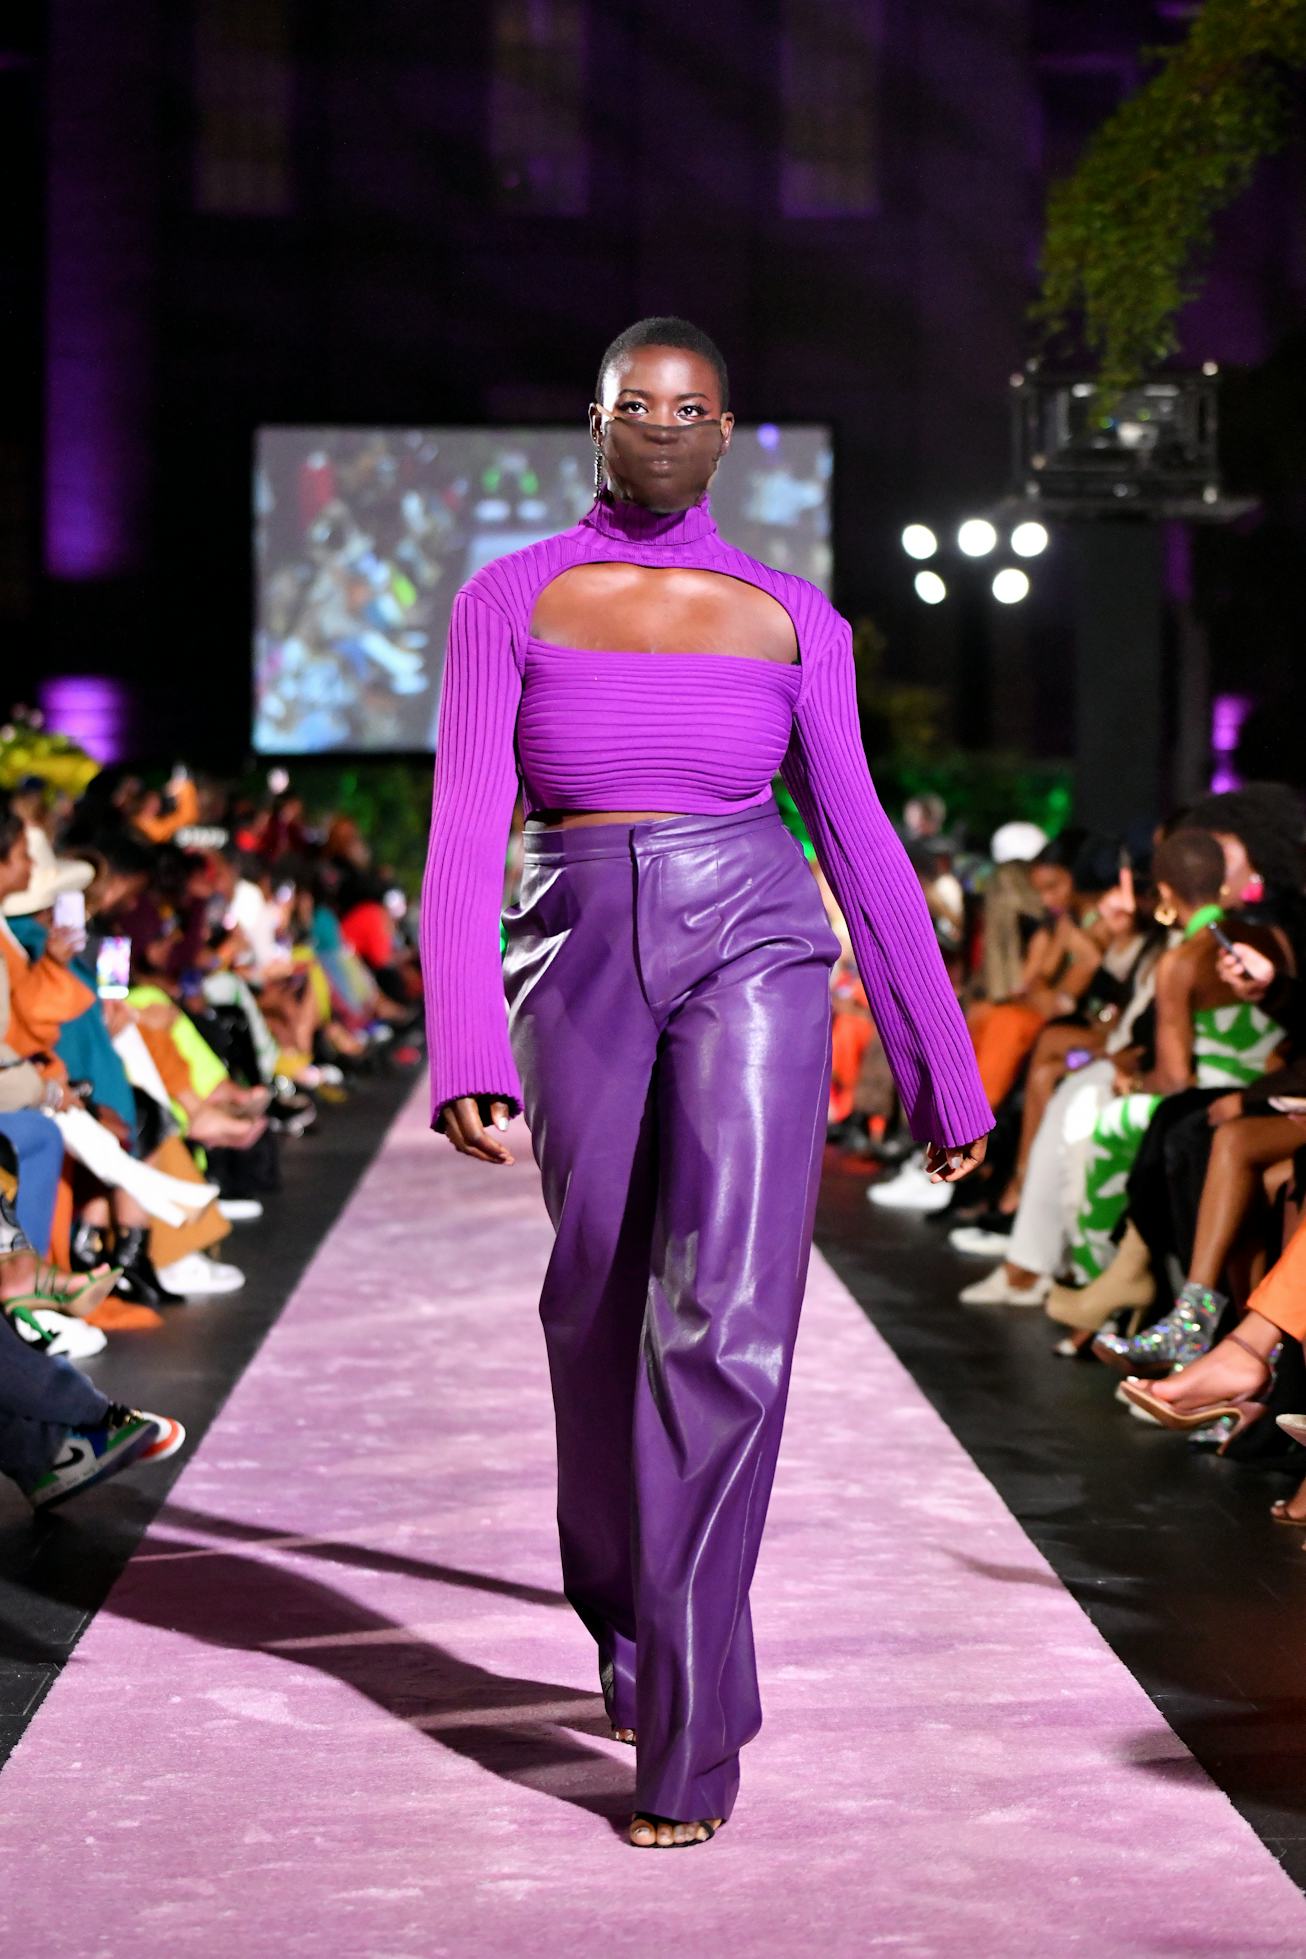 A look from Hanifa's Fall 2021 collection from its fashion show in Washington D.C.